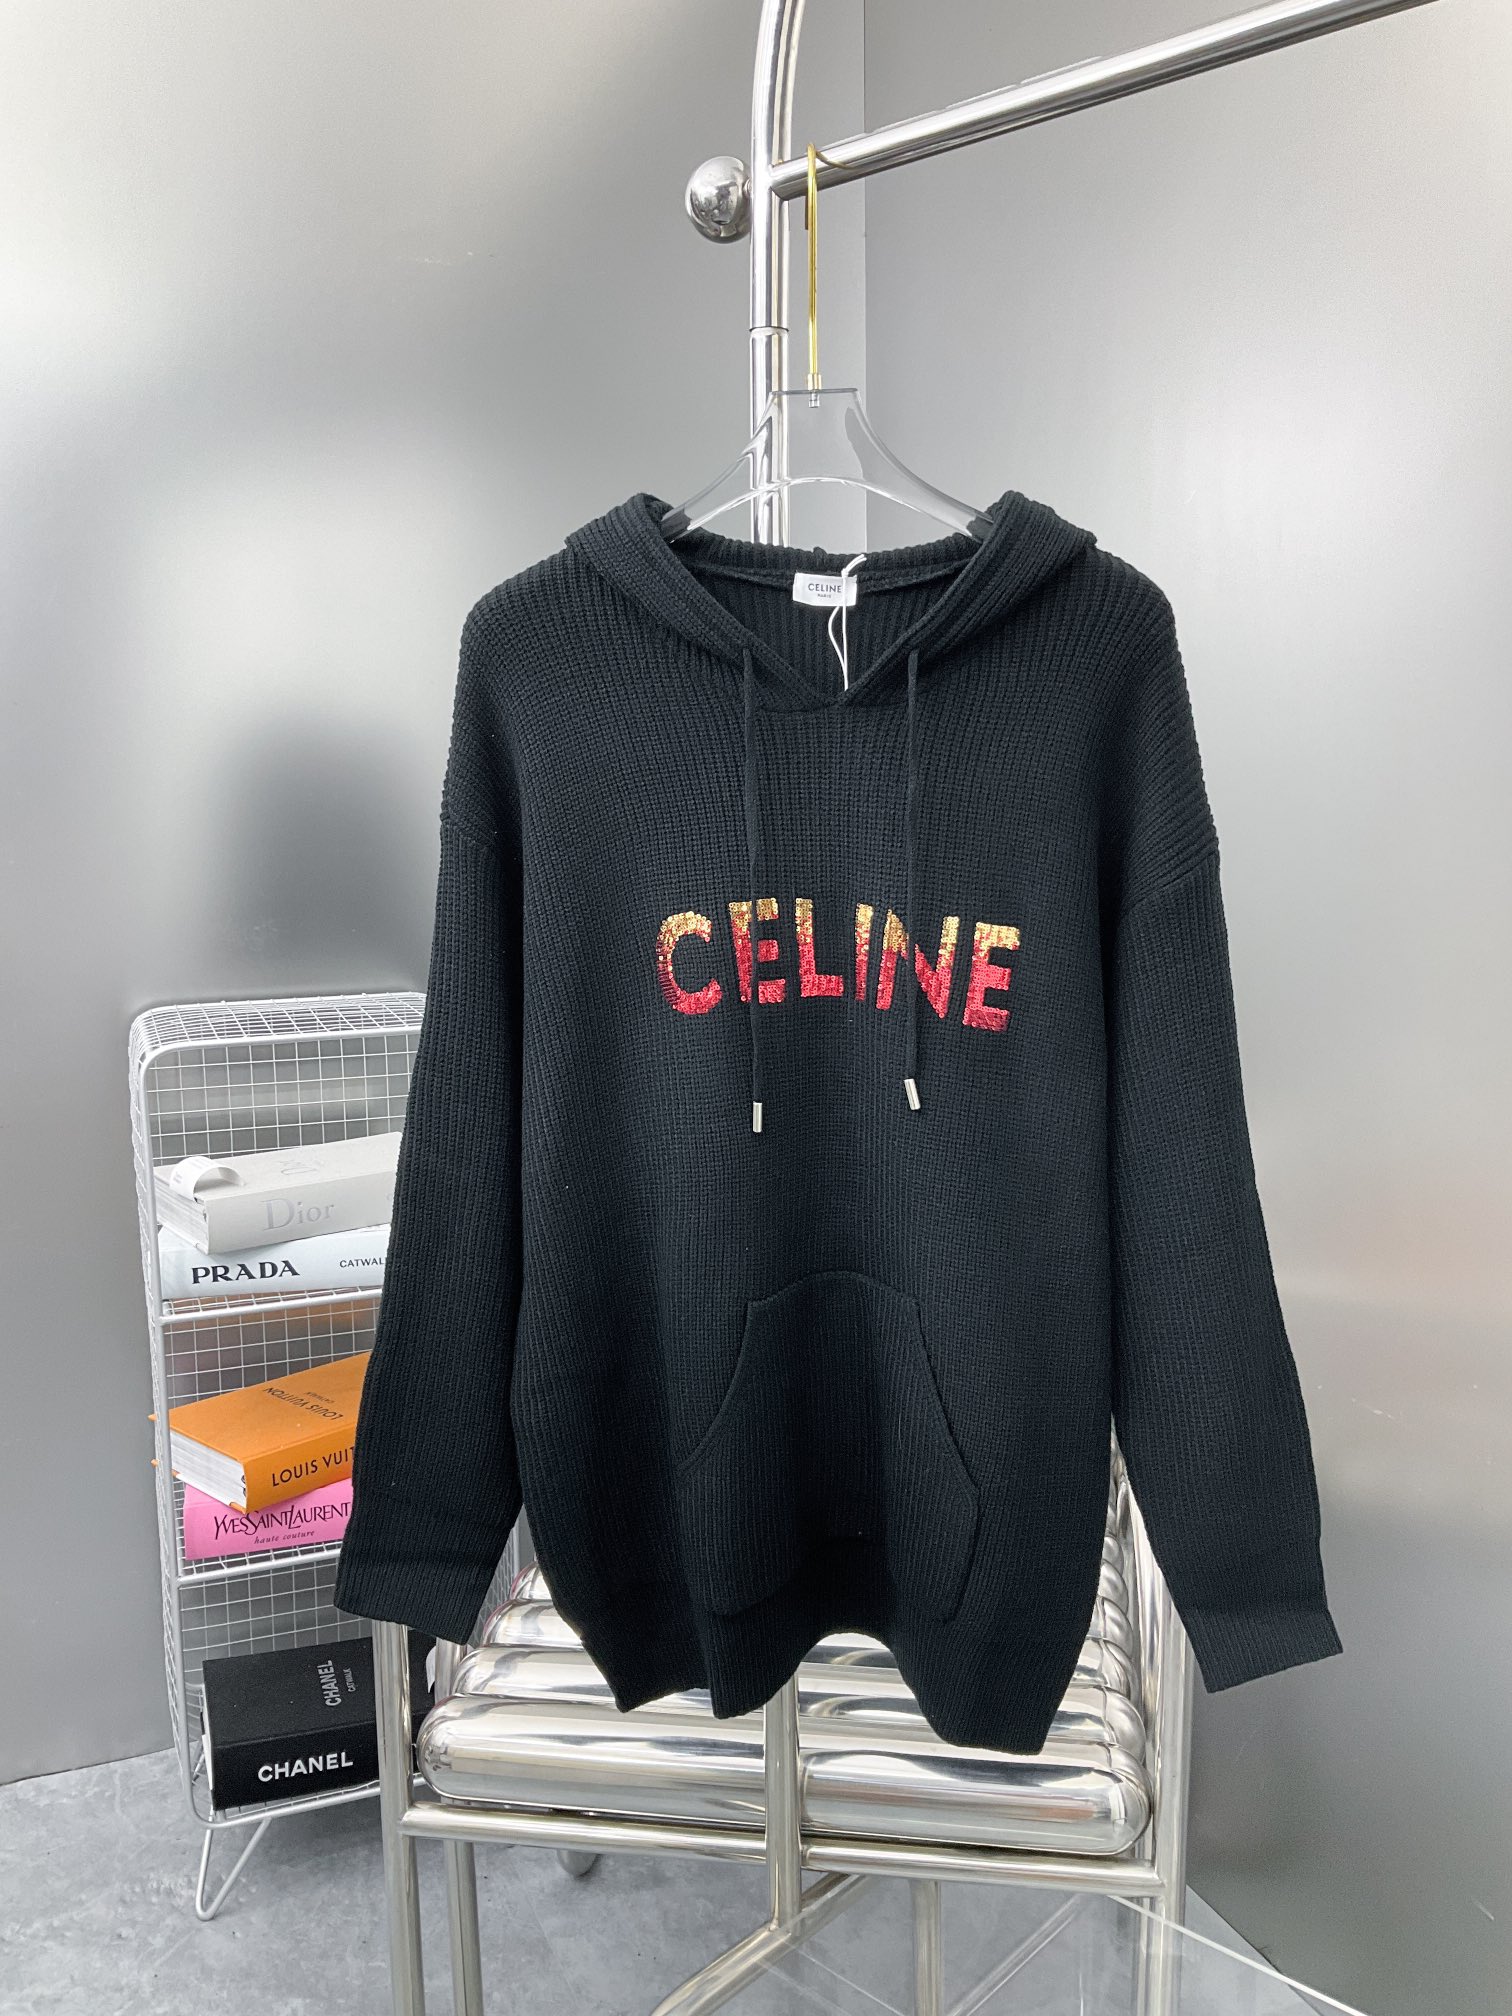 Celine mirror quality
 Clothing Sweatshirts Knitting Fall Collection Hooded Top